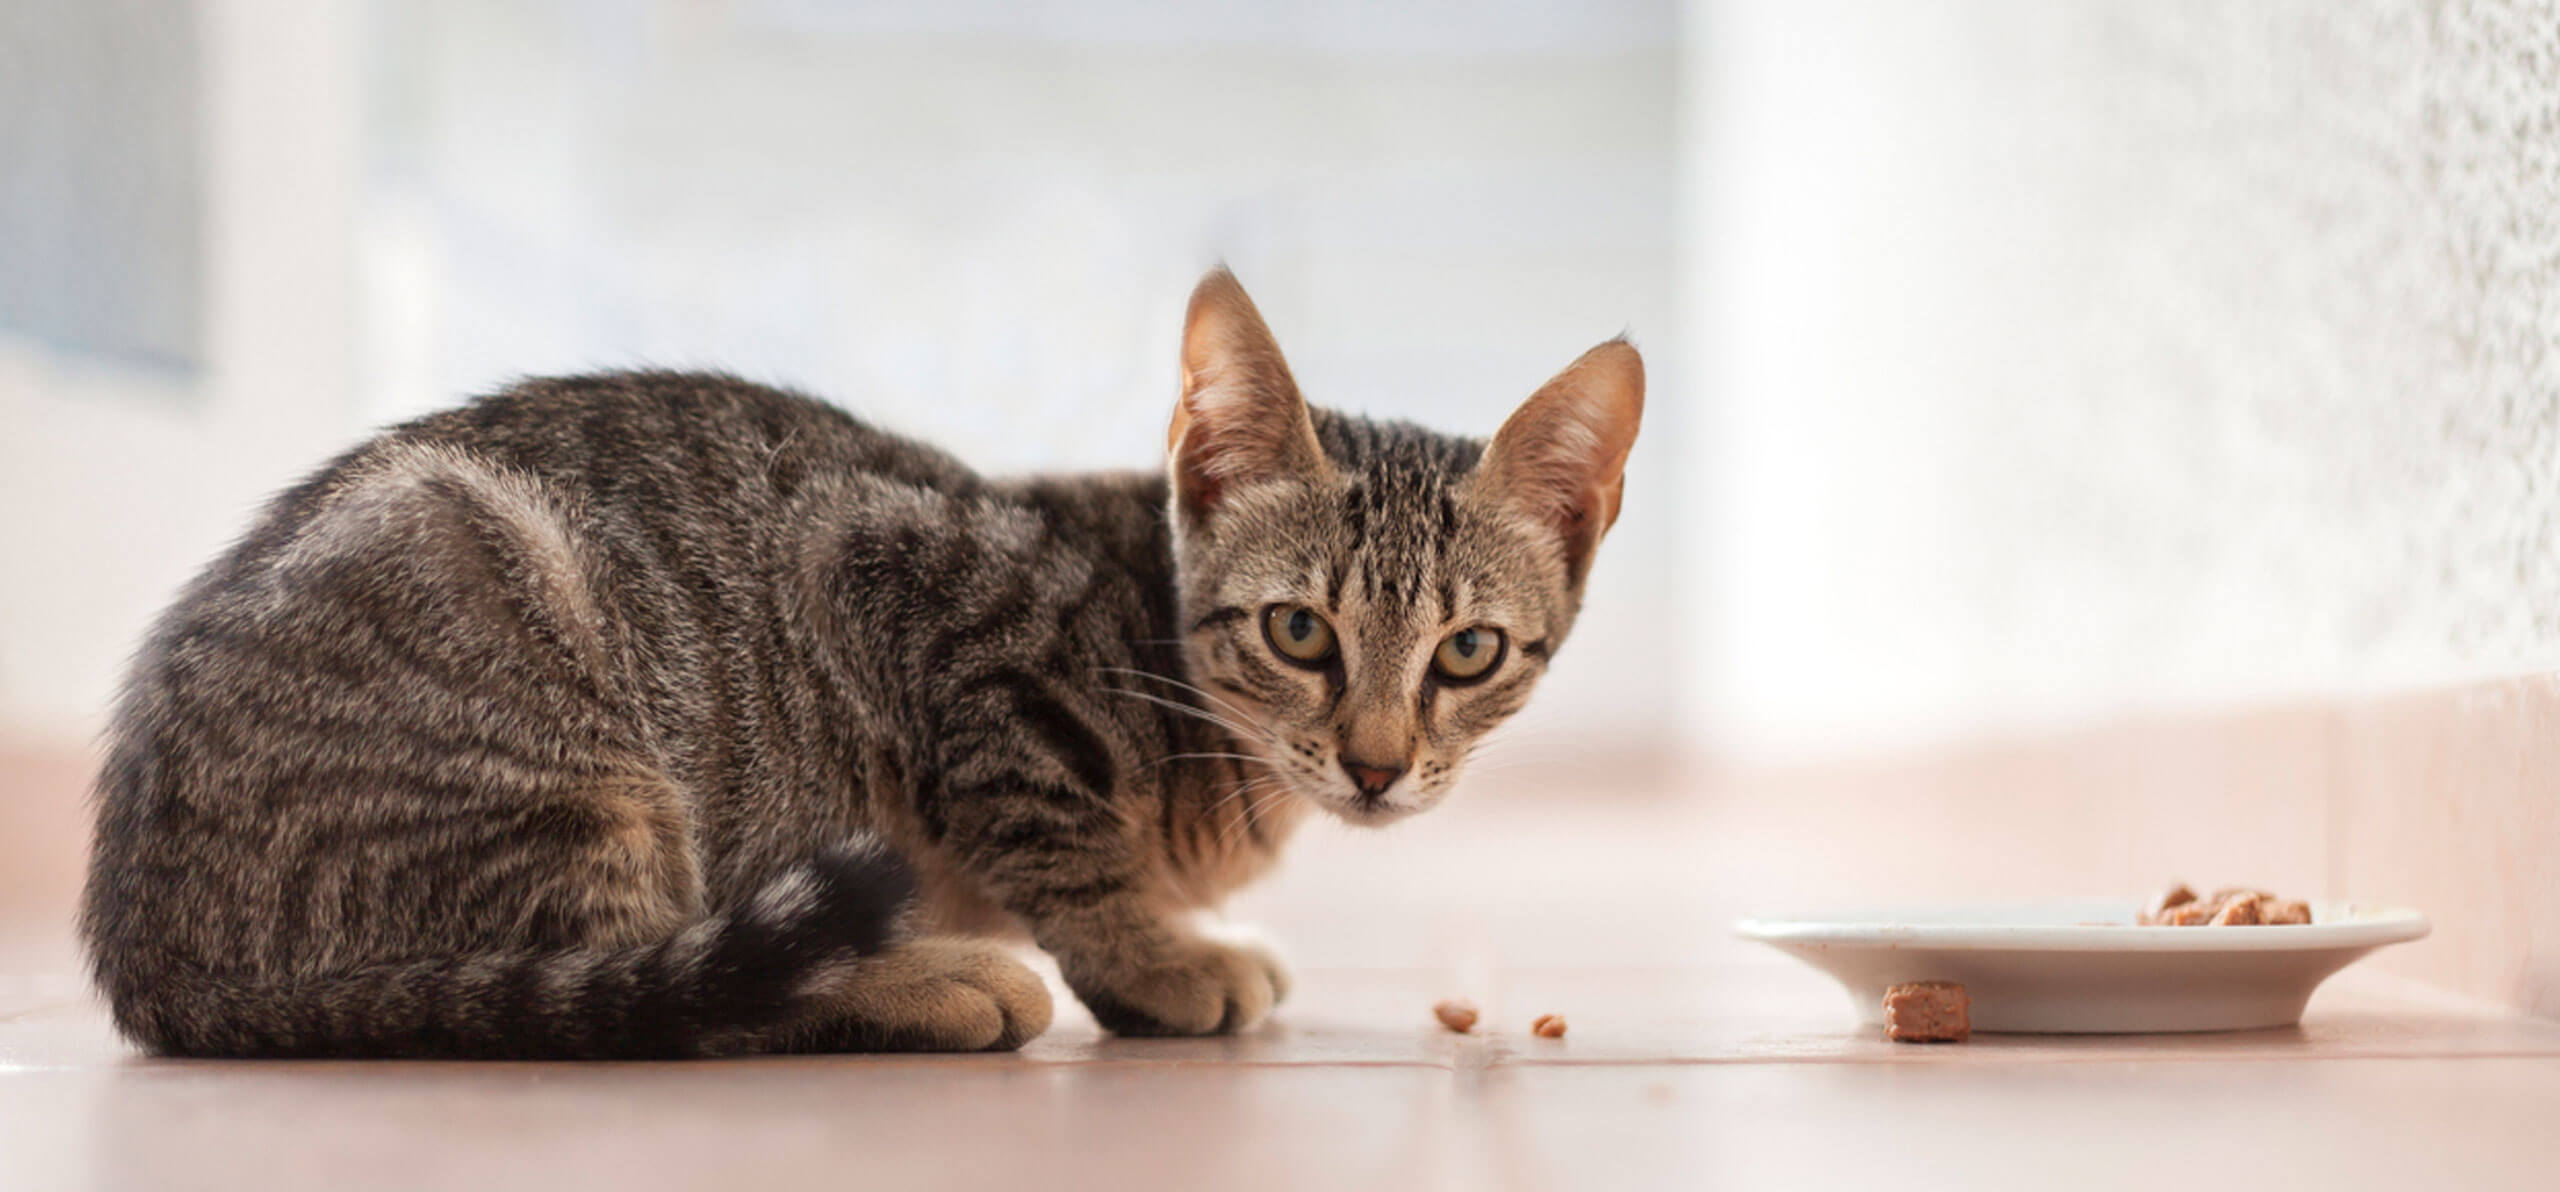 kitten looking to its right in front of its food bowl with nibbles on the floor